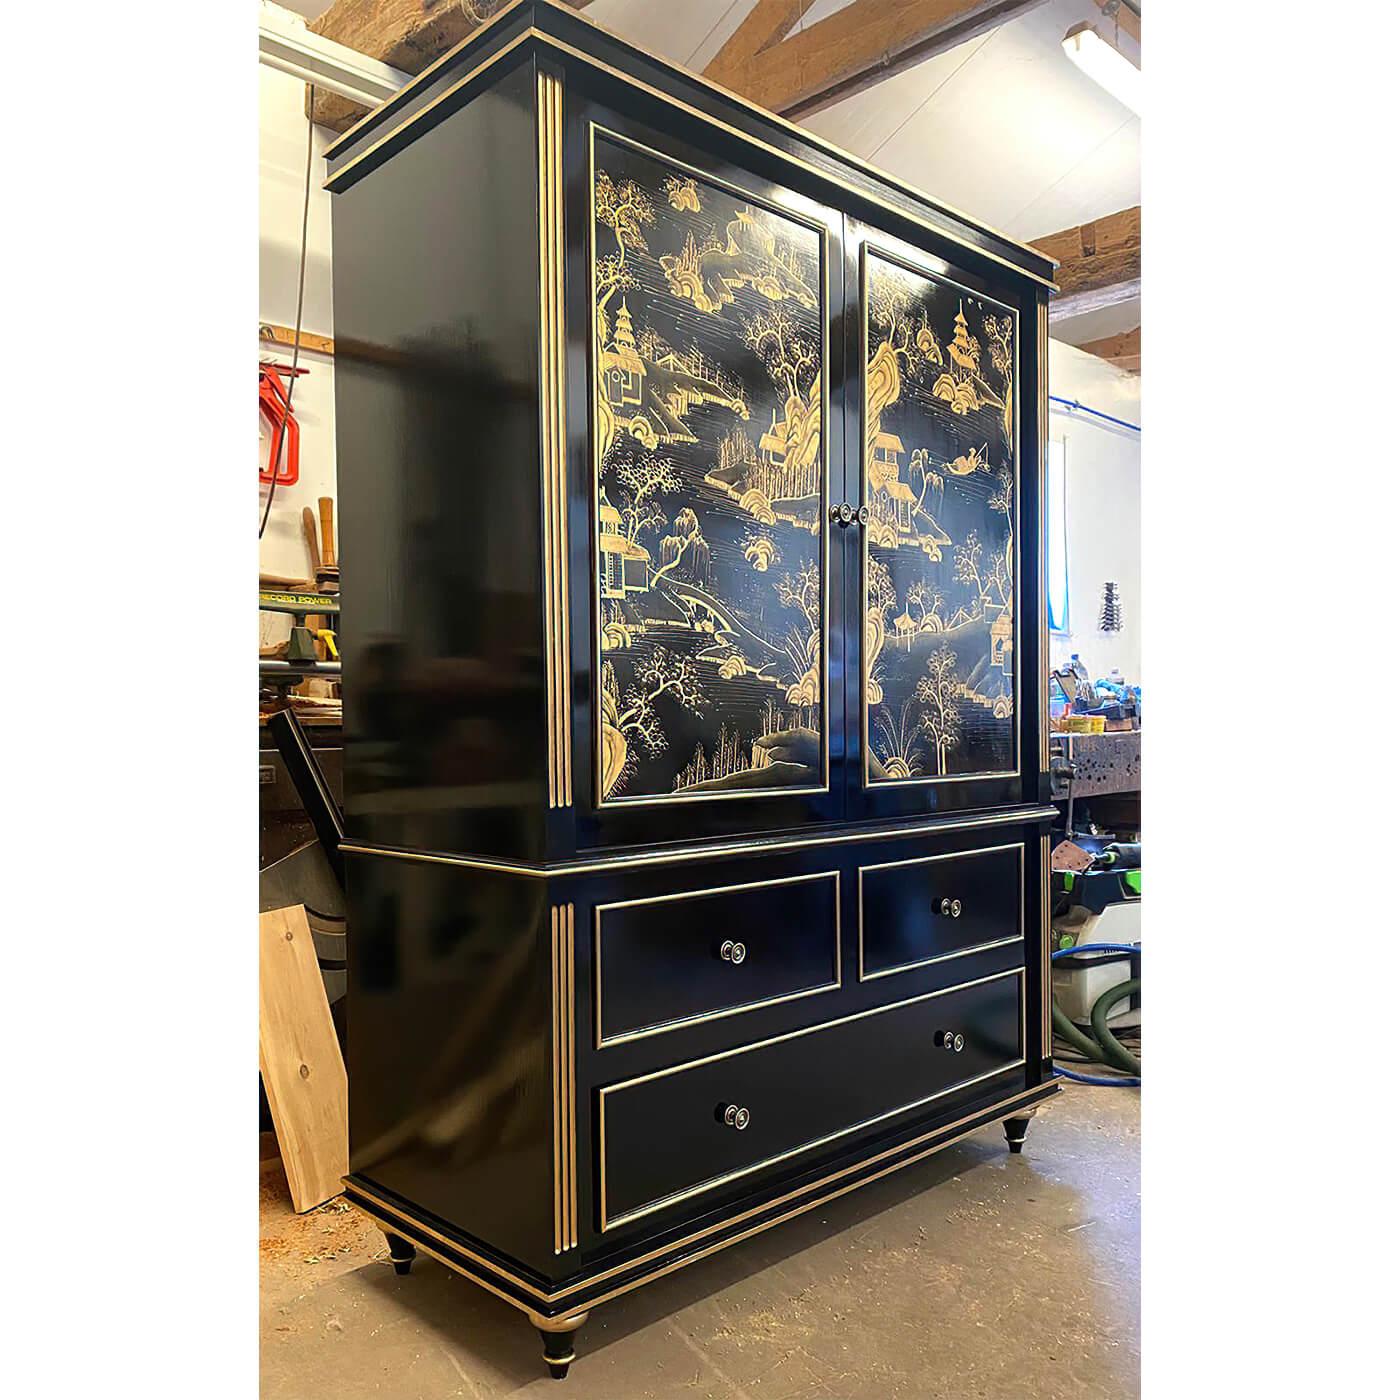 An English Regency-style cabinet. Bench made in our custom workshop in London. Fitted for TV, this can also be used as a chic antique bar cabinet.

With two hand-painted Chinoiserie lacquered and gilded panels, depicting rural Chinese scenes around